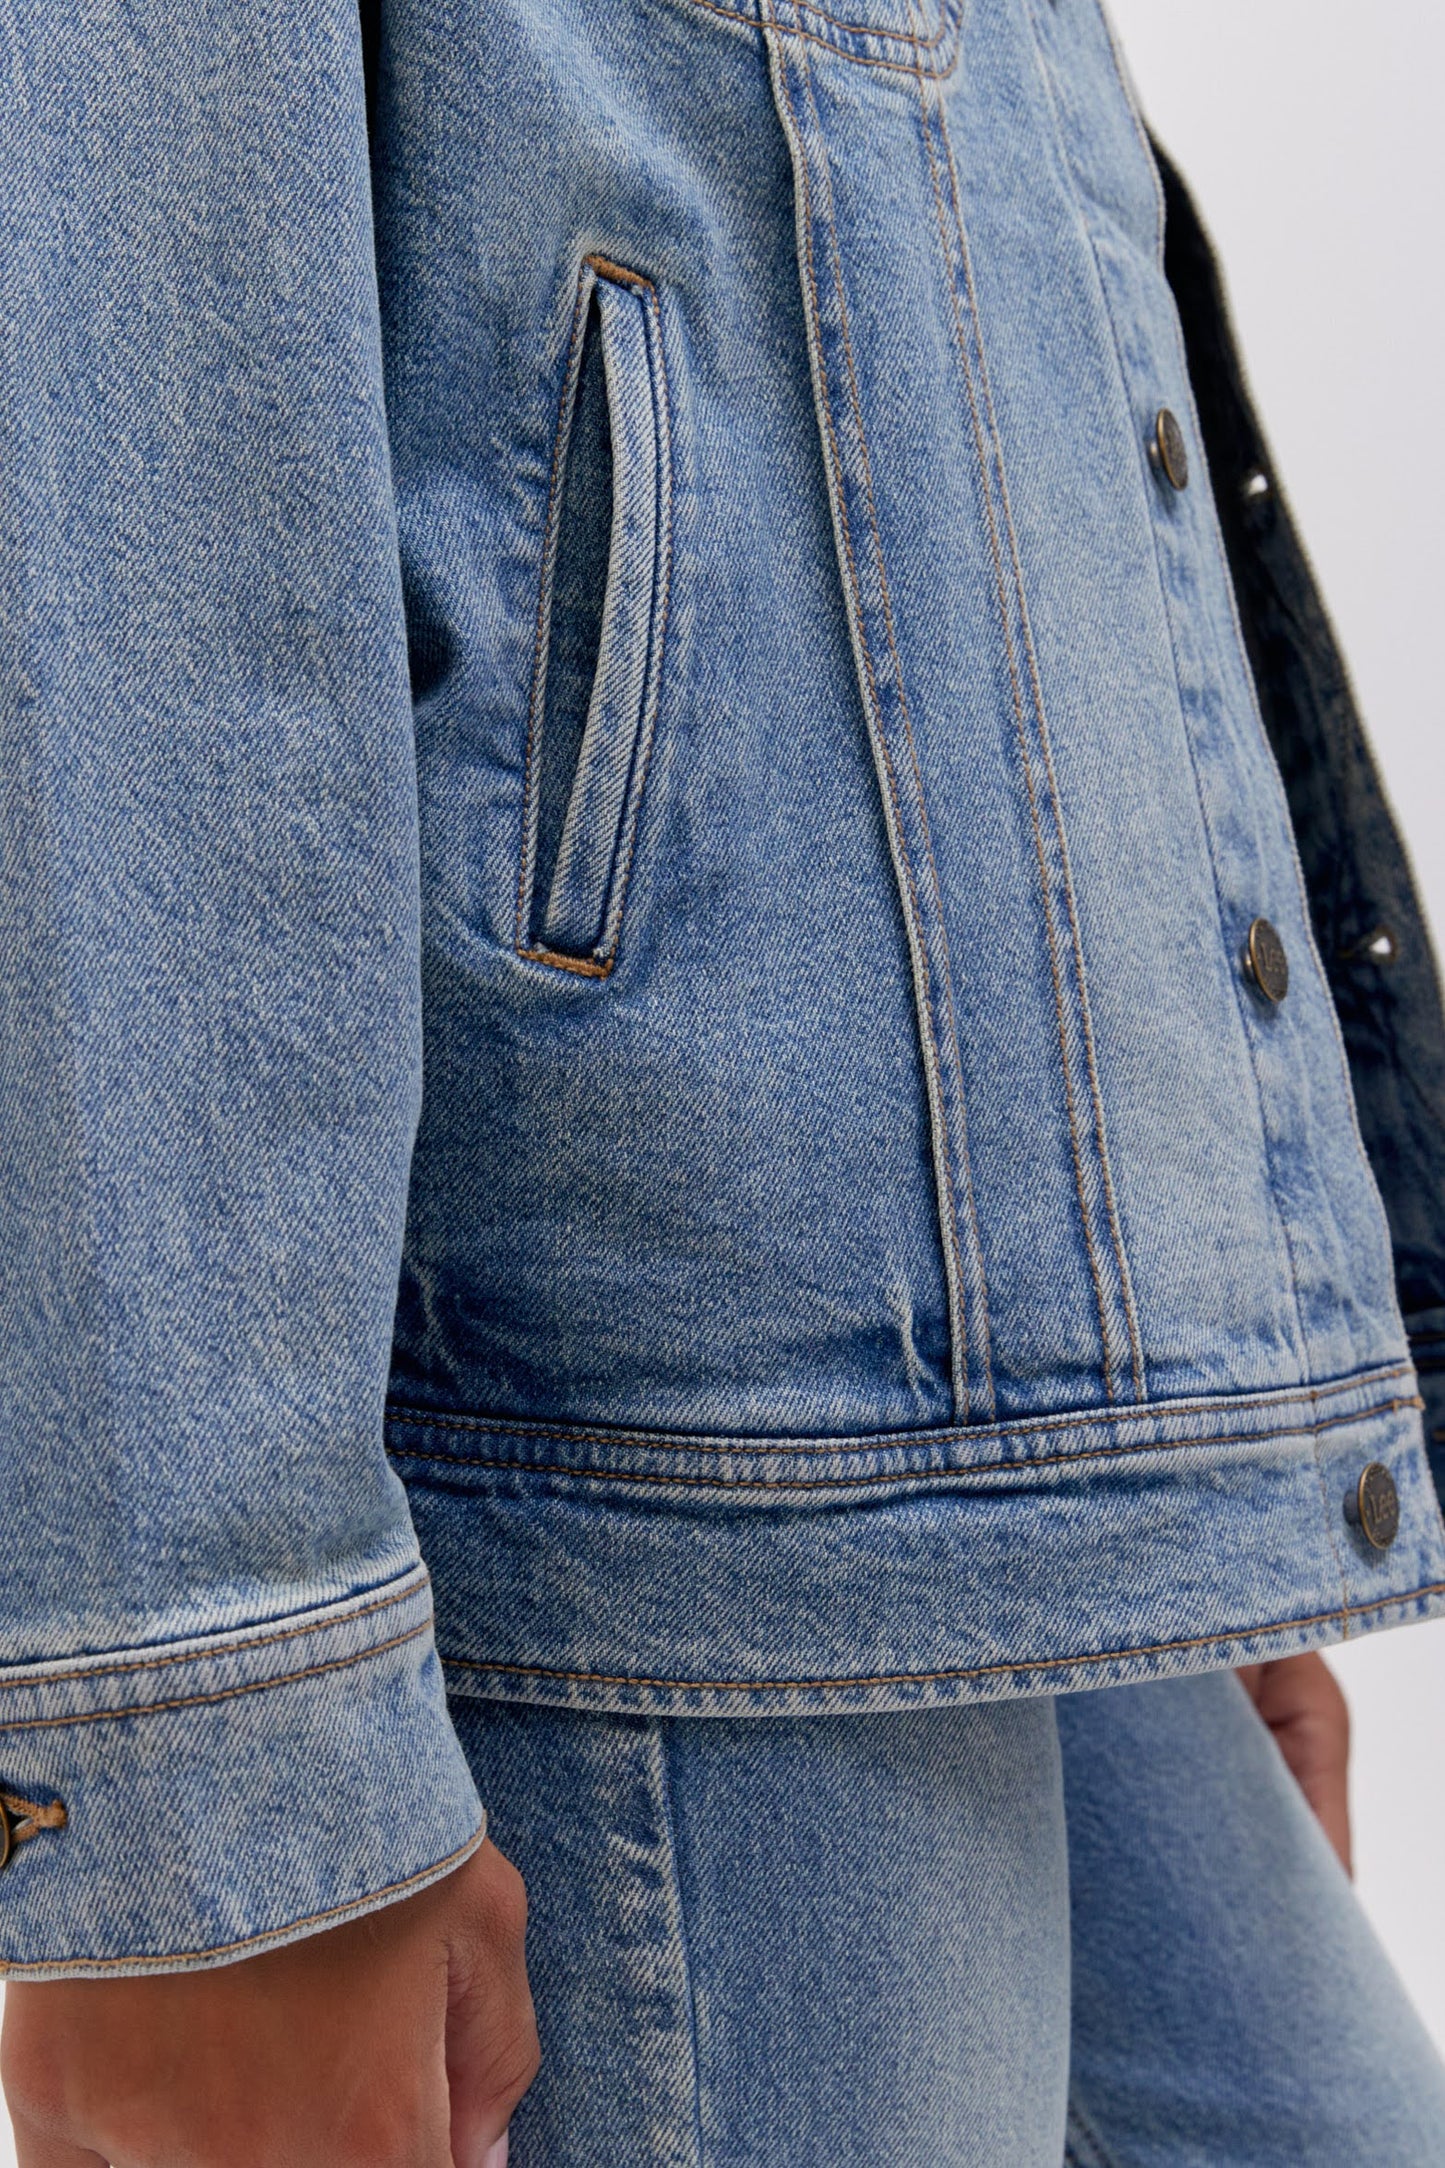 Close up side pocket detail photo of a reimagined Lee Denim rider jacket in an oversized fit.